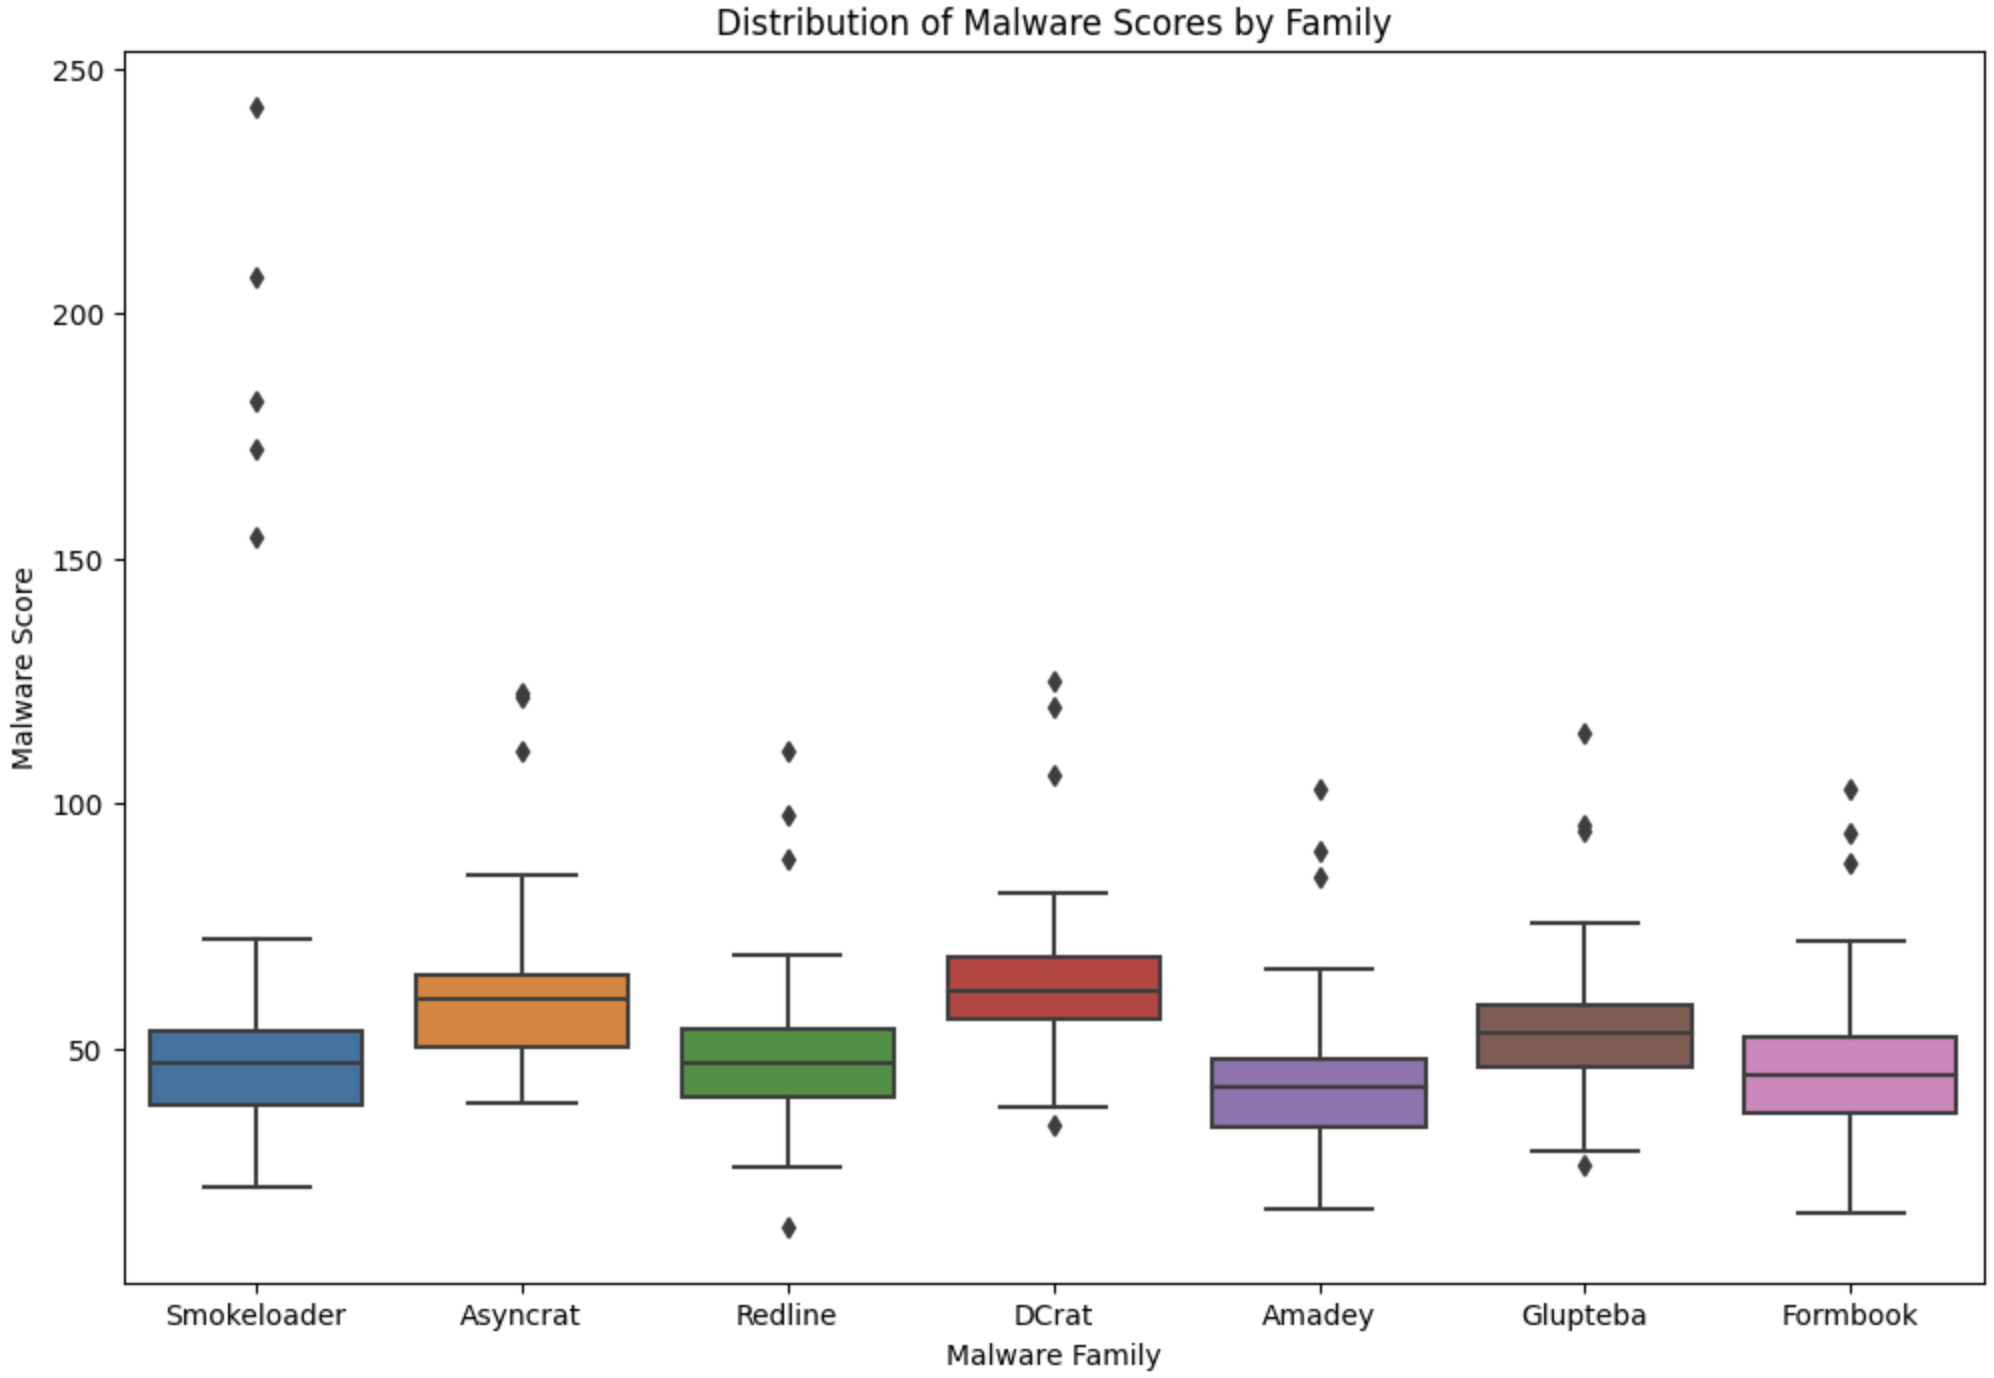 Example visualization of malware distribution scores by family from an example dataset